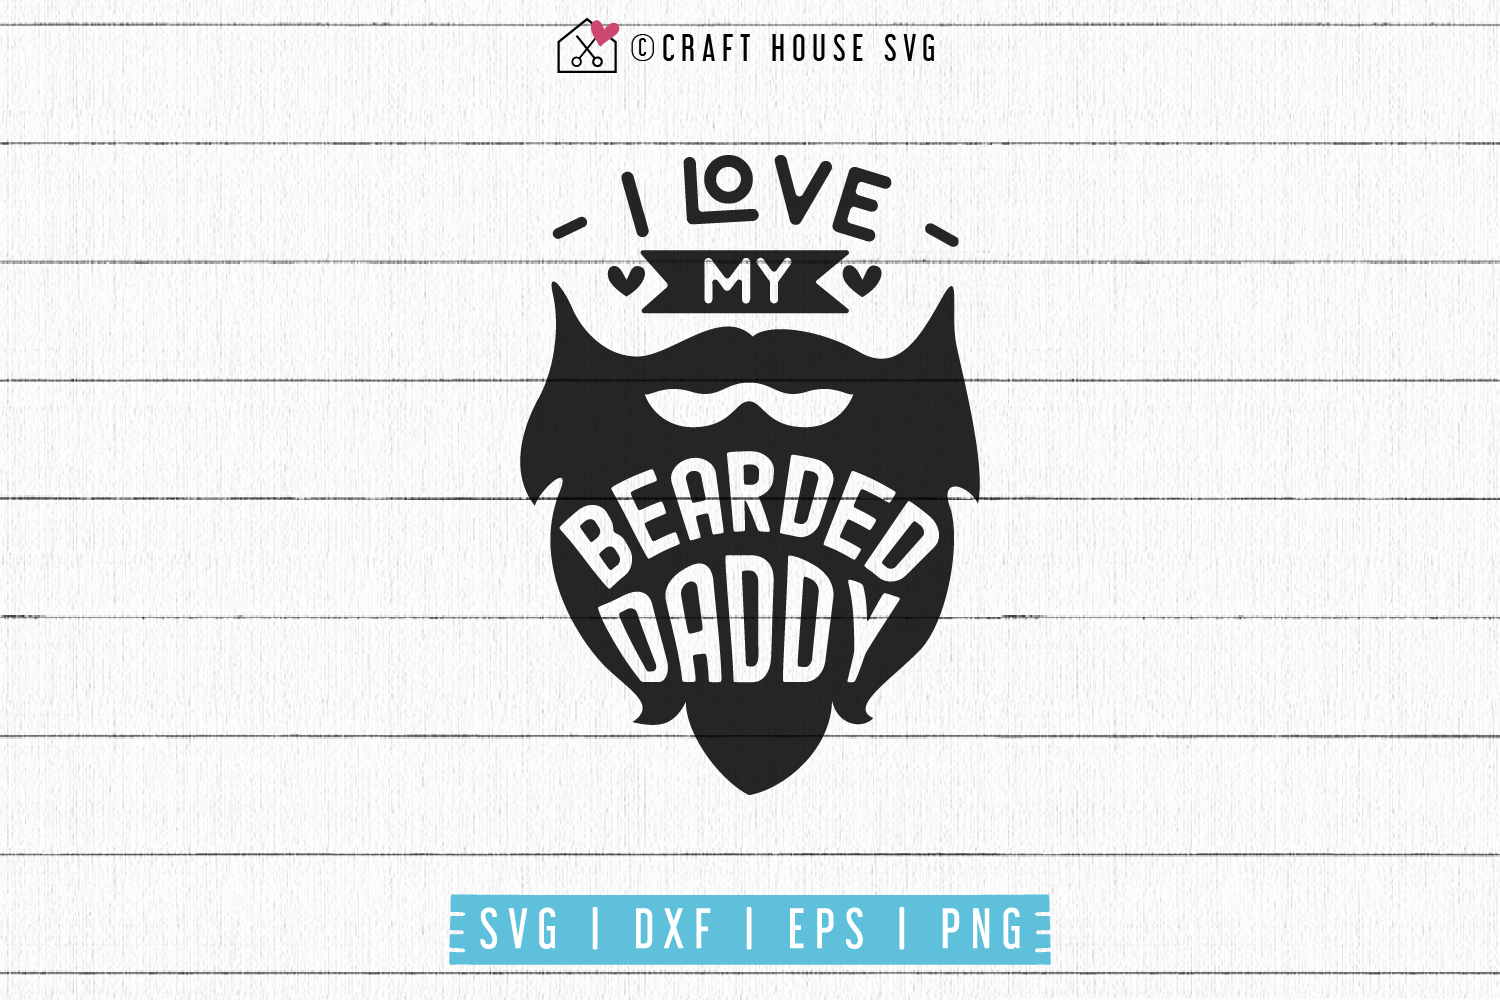 I love my bearded daddy SVG | M53F Craft House SVG - SVG files for Cricut and Silhouette